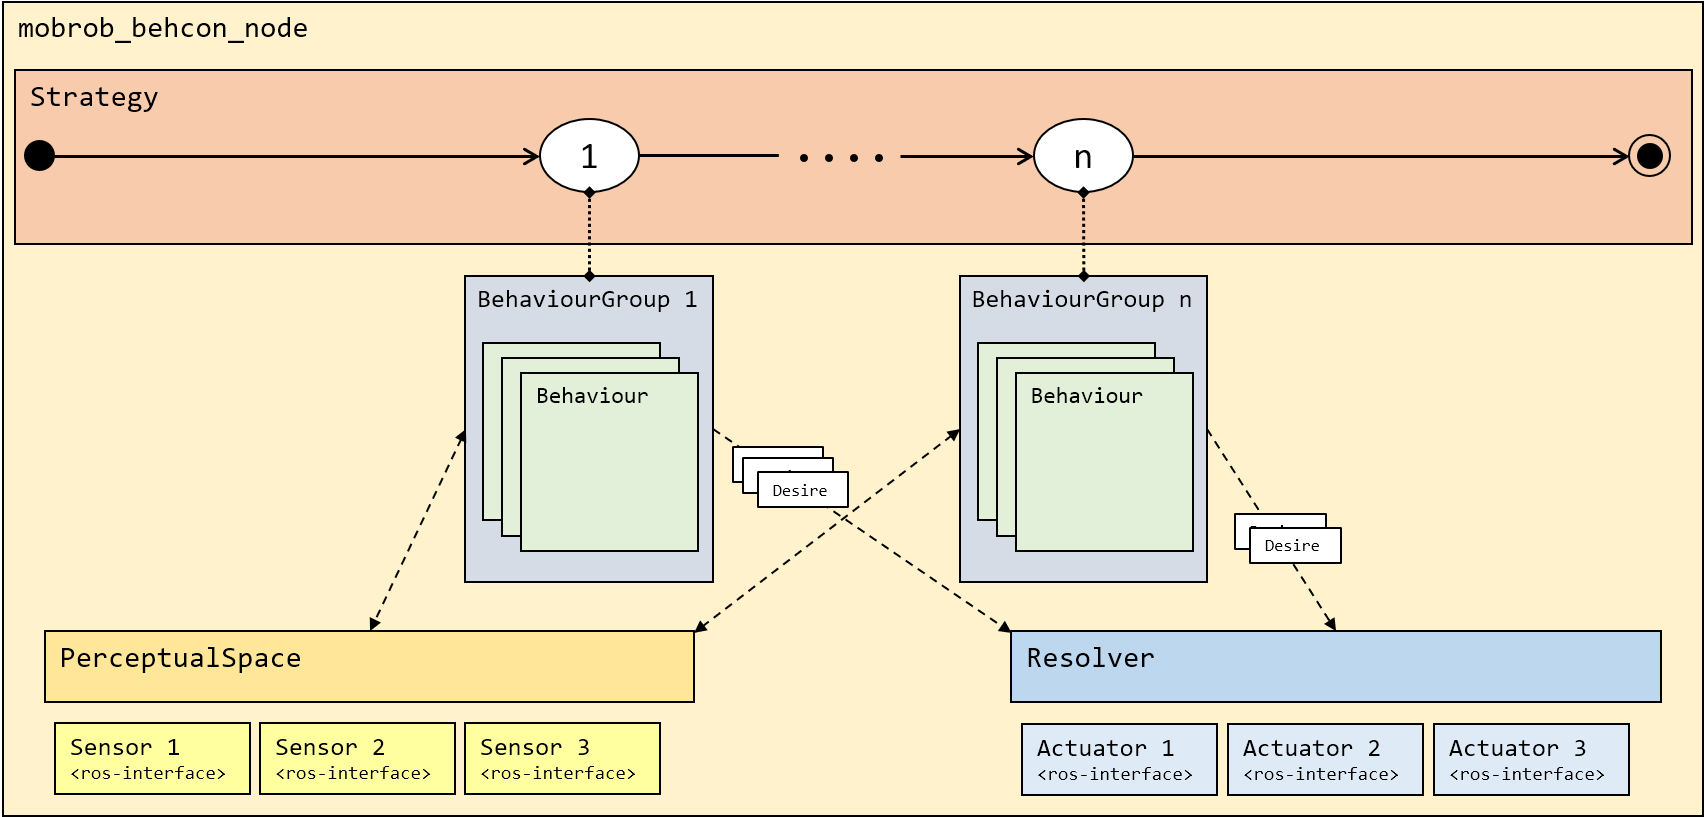 Overview of behaviour-based control implementation in MOBROB